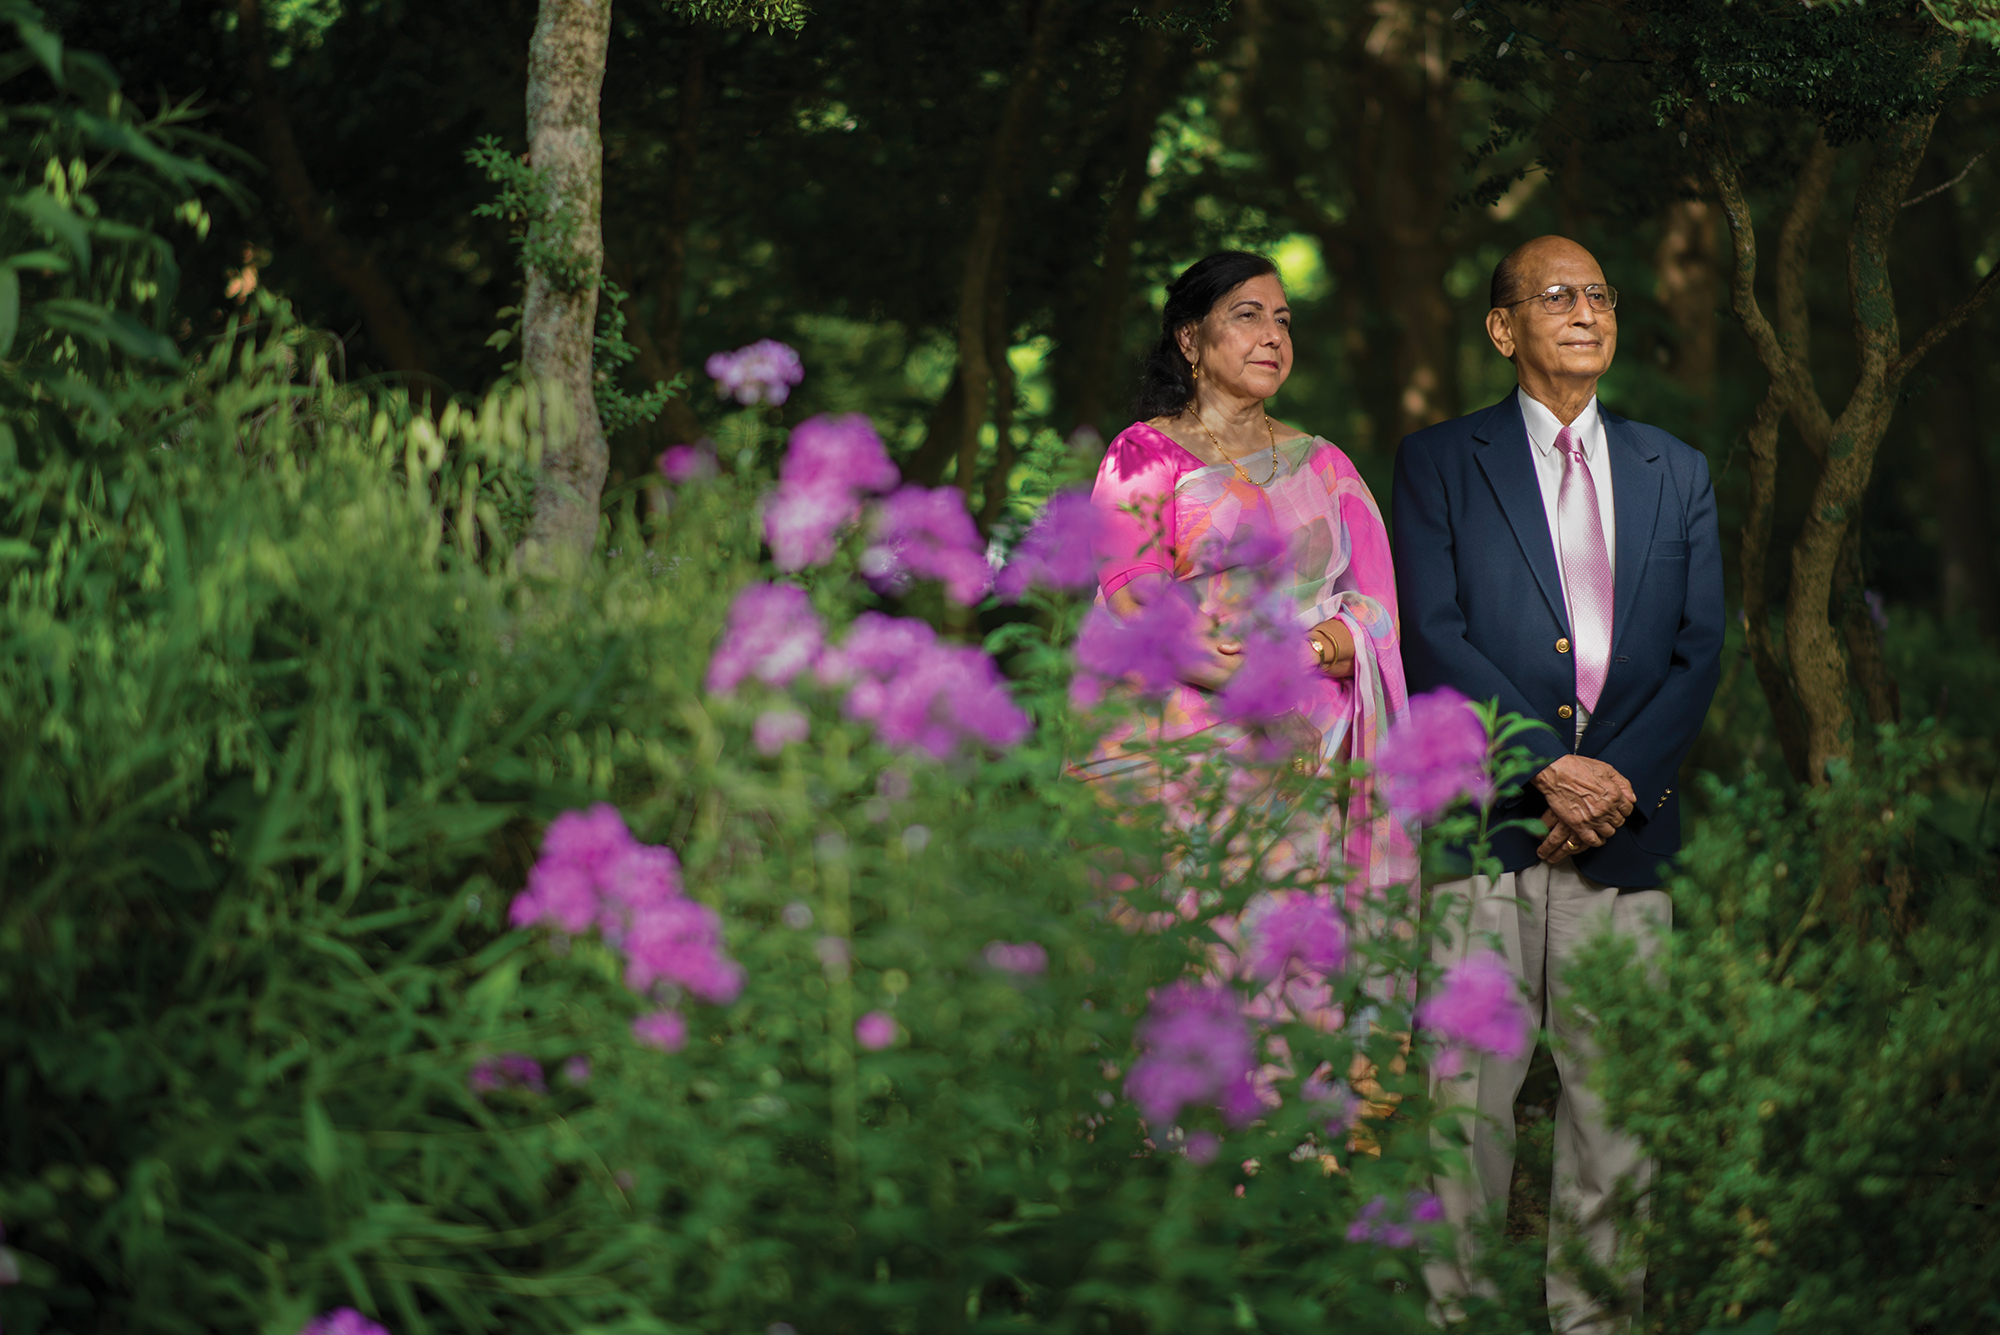 S.K. and Shashi Airee pictured in garden